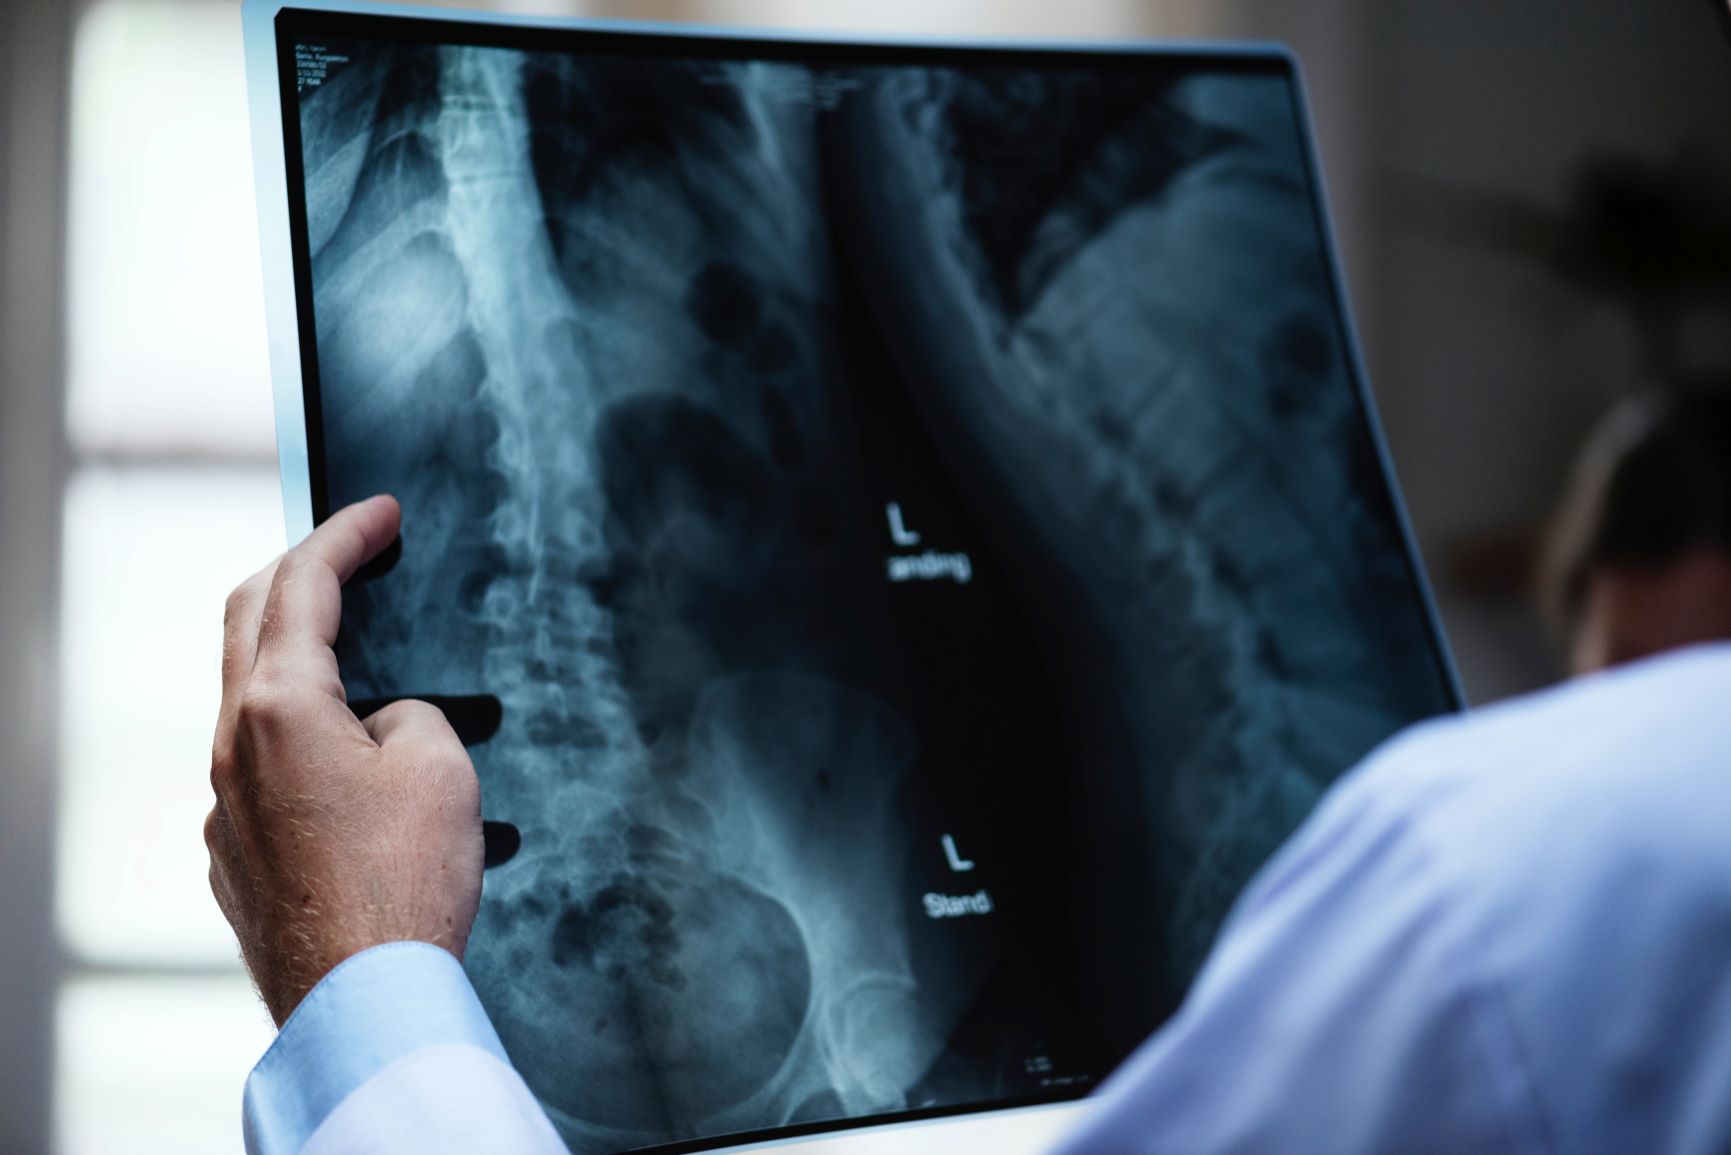 Spinal Cord Injuries and Personal Injury Cases